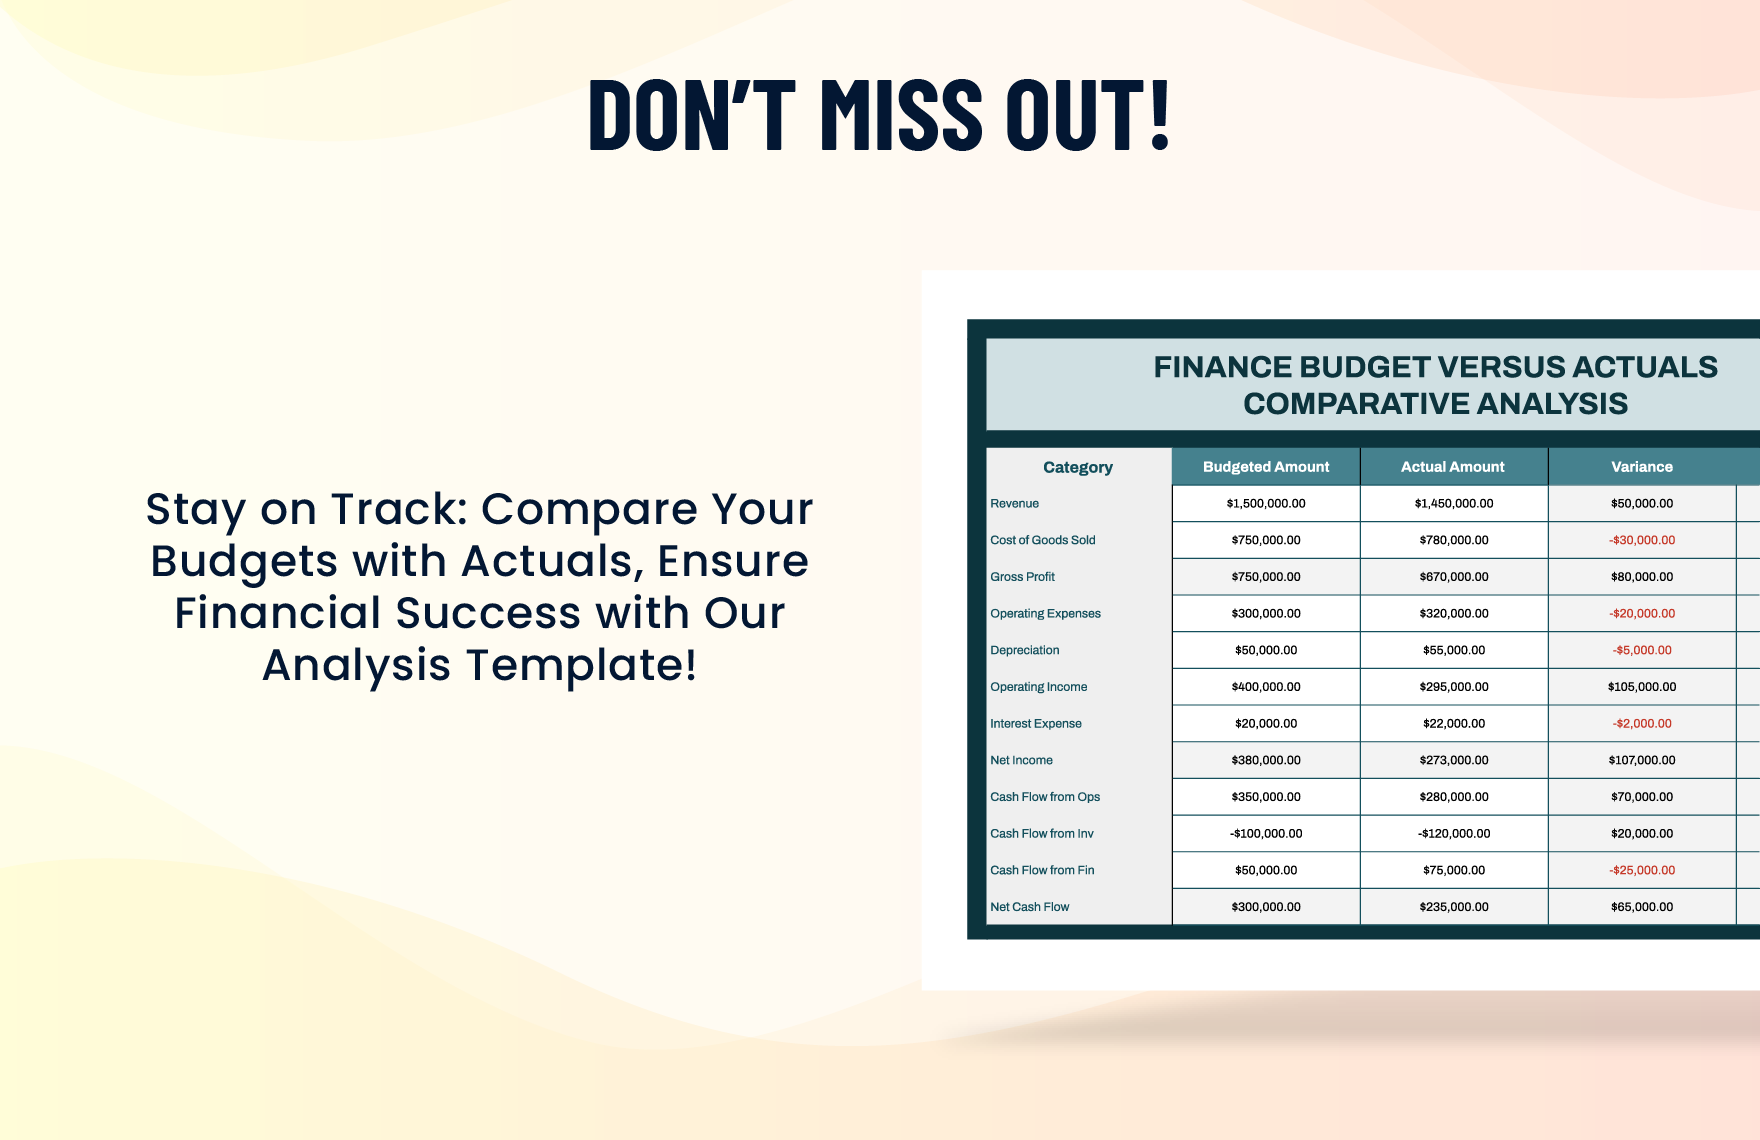 Finance Budget versus Actuals Comparative Analysis Template